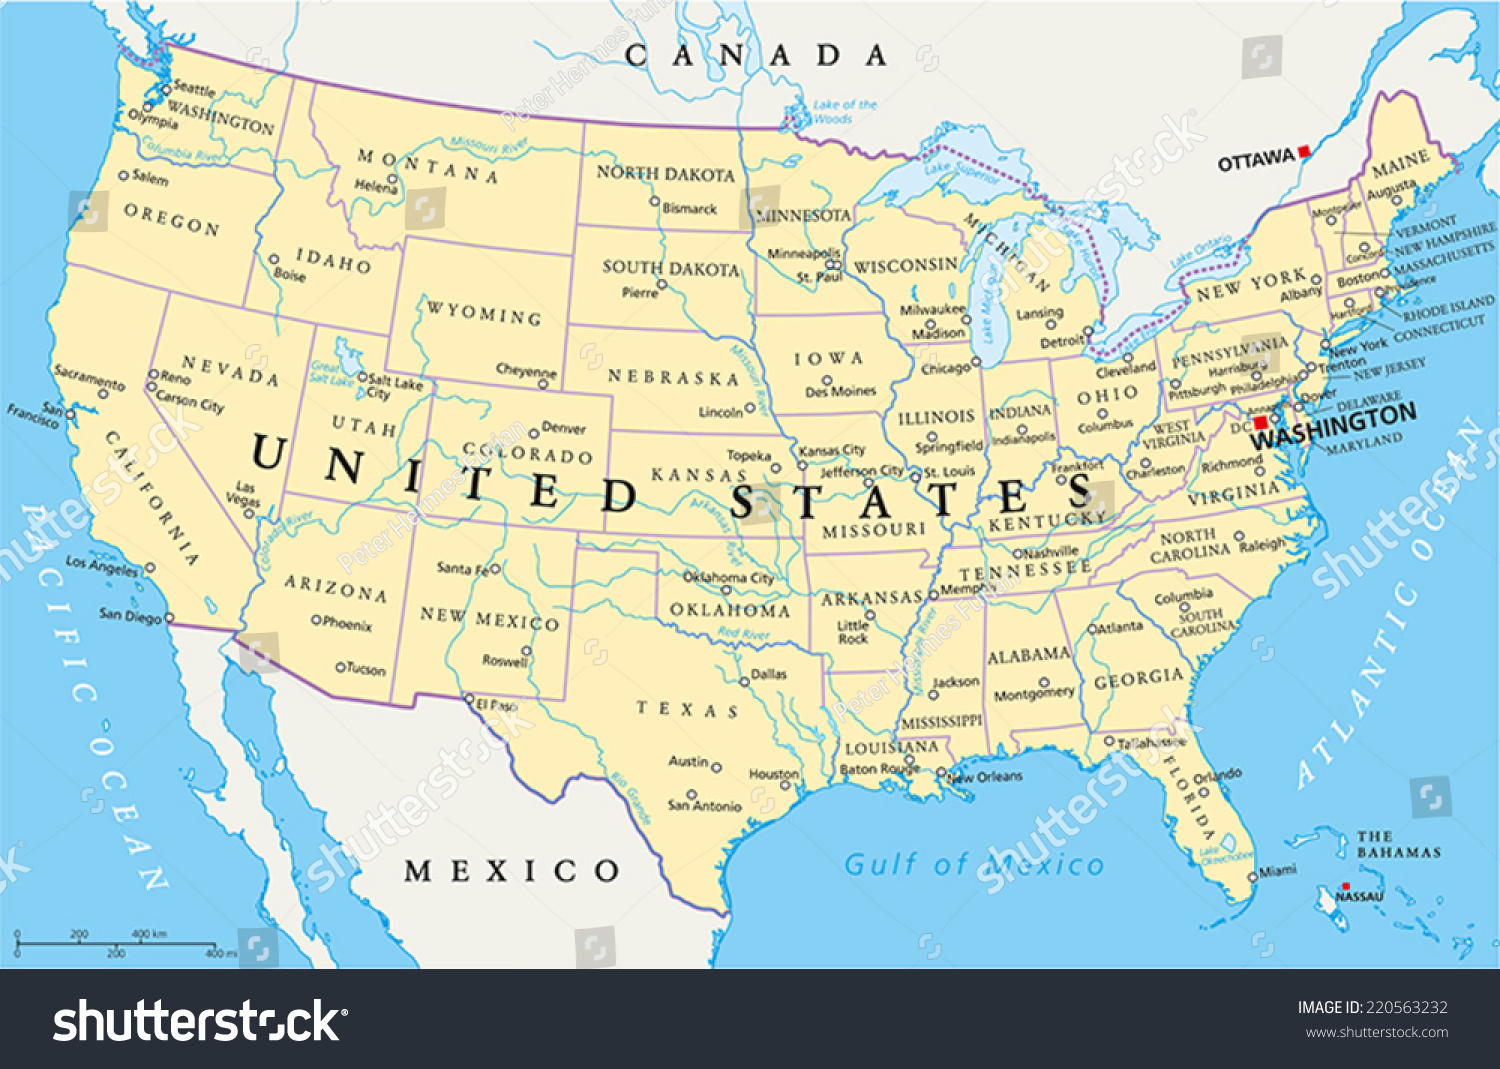 United States Of America Political Map Stock Photo 220563232